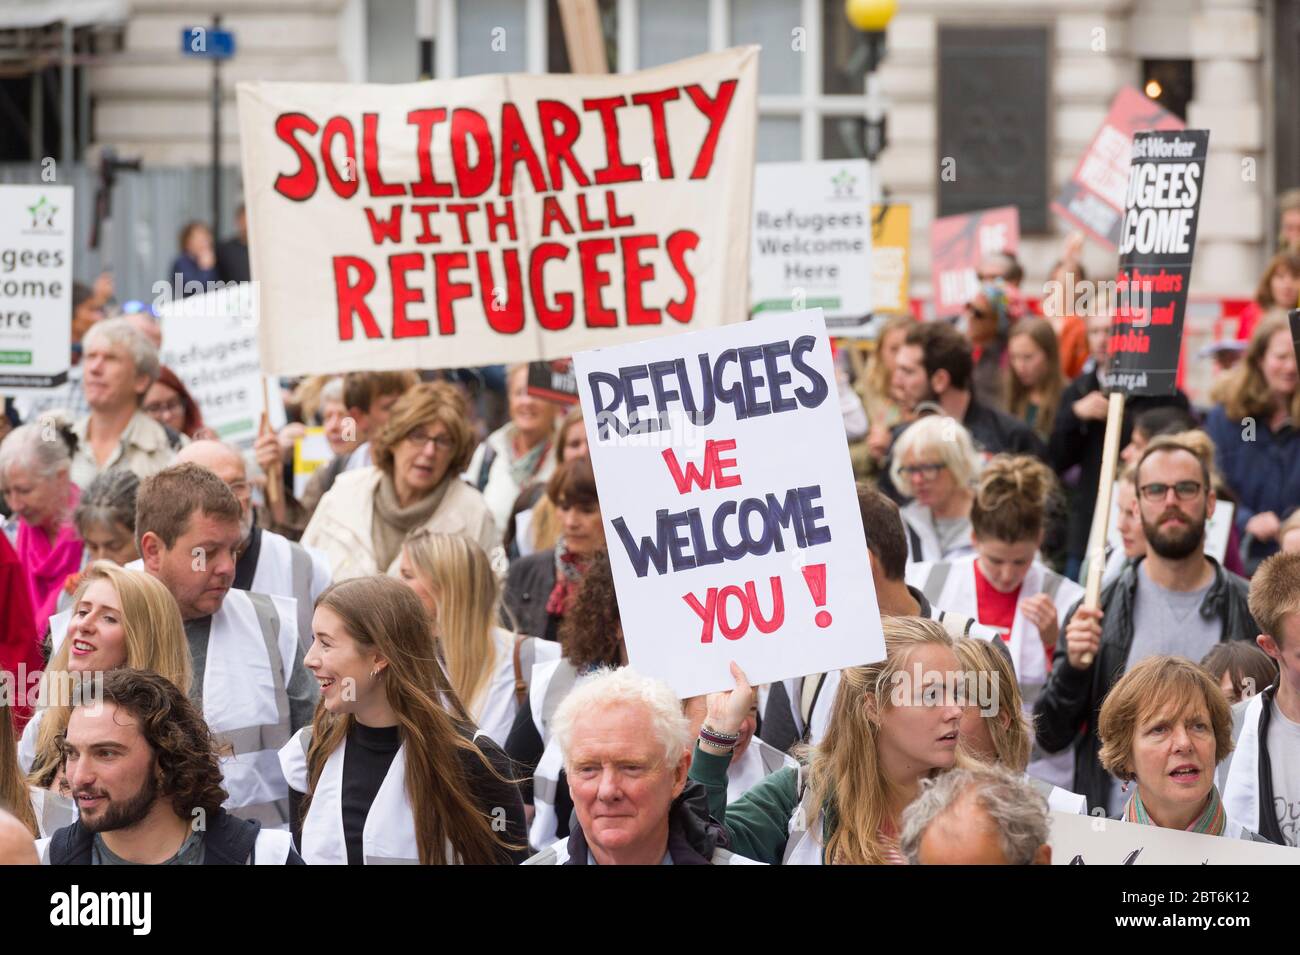 refugees-welcome-here-march-from-park-lane-to-parliament-square-to-show-solidarity-with-refugees-piccadilly-london-uk-17-sep-2016-2BT6K12.jpg